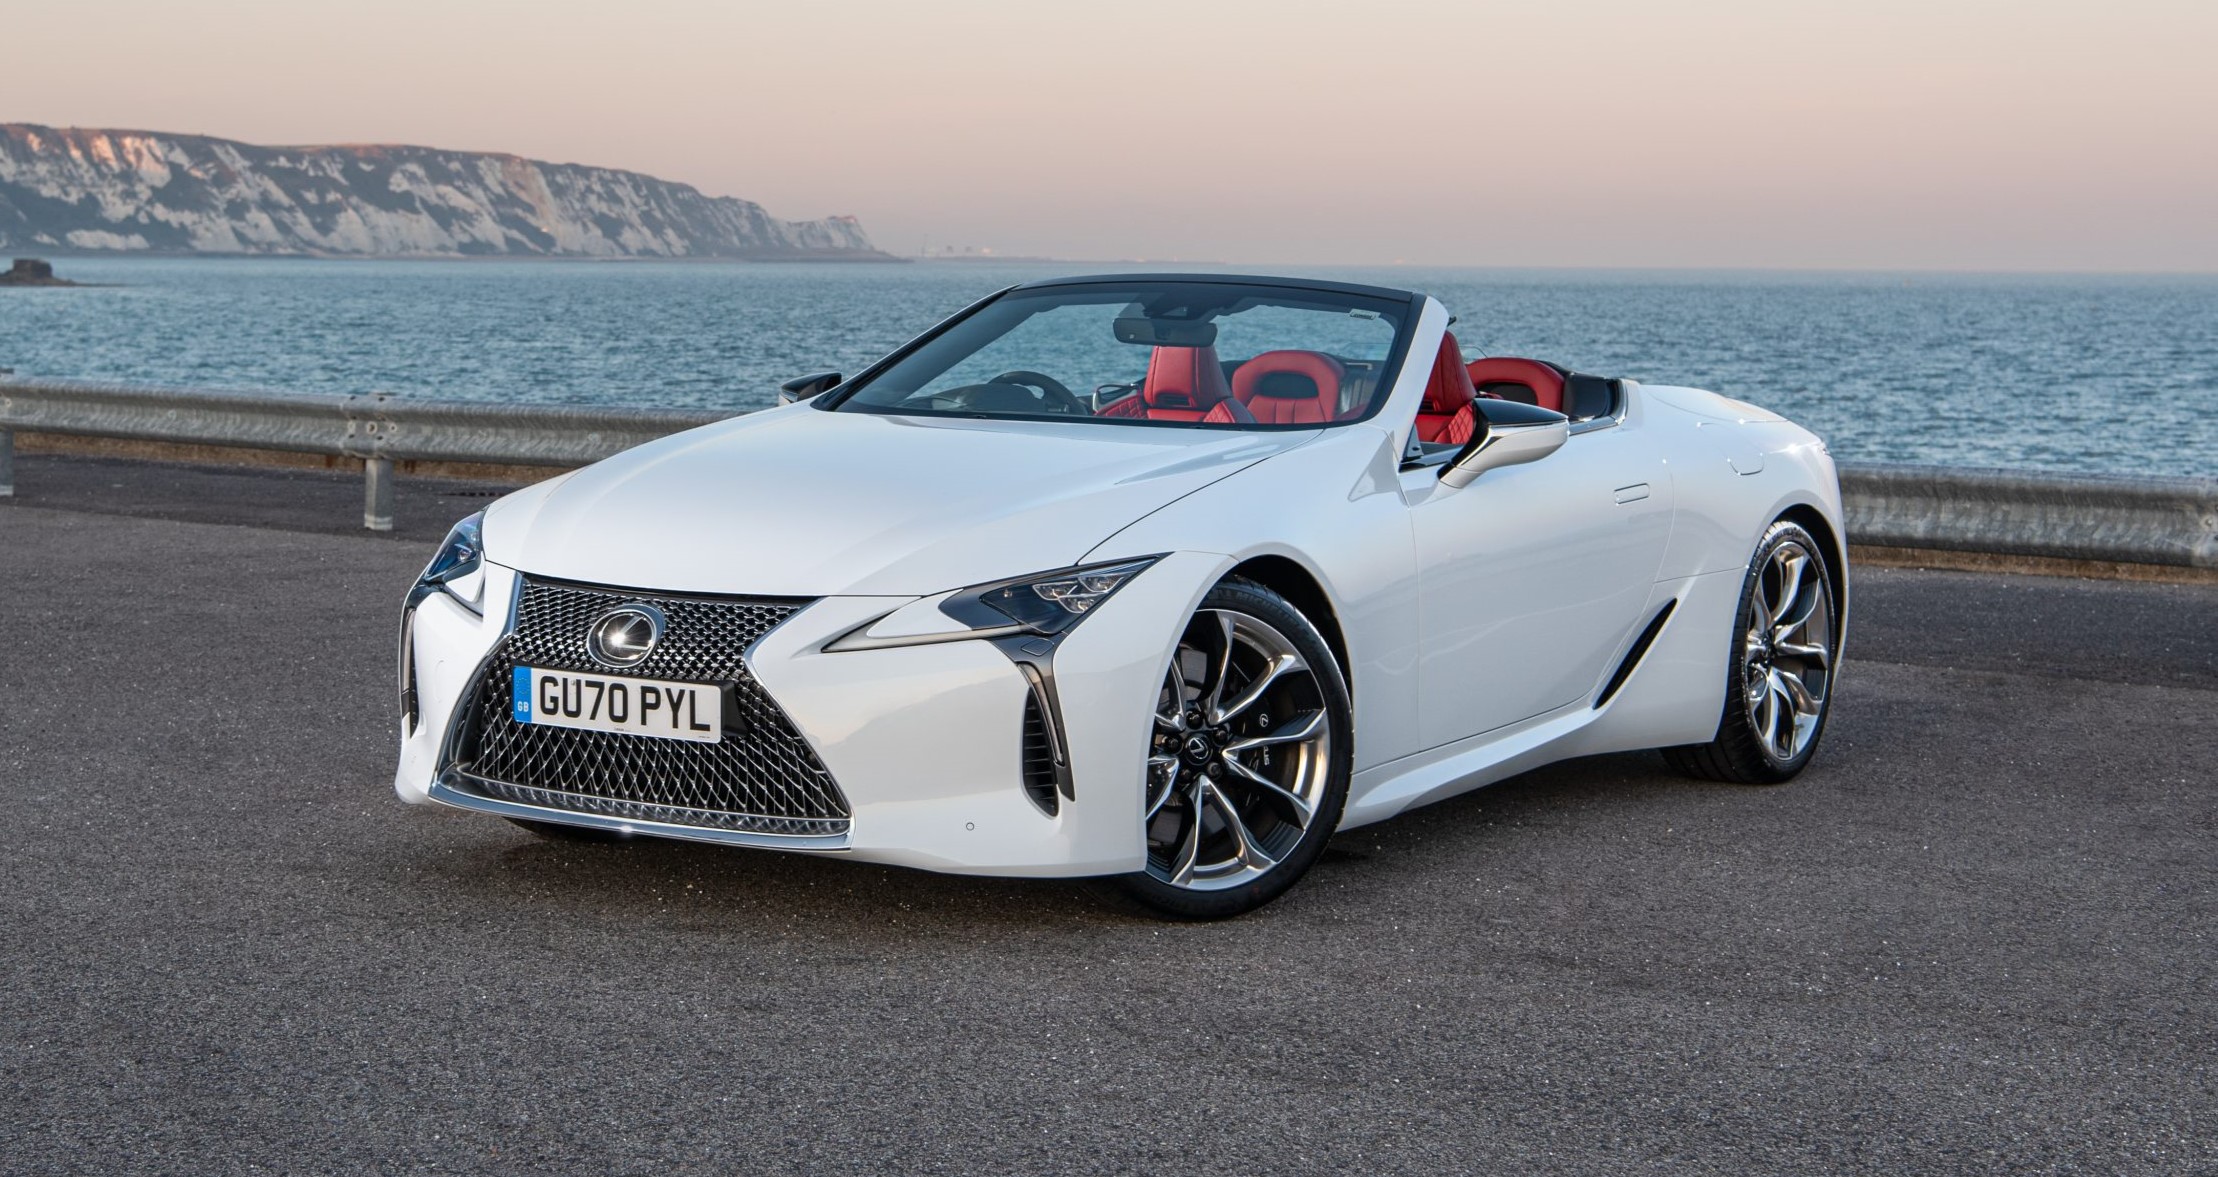 Top Down and on the Road: 5 of the Best Convertibles for Cruising in Style